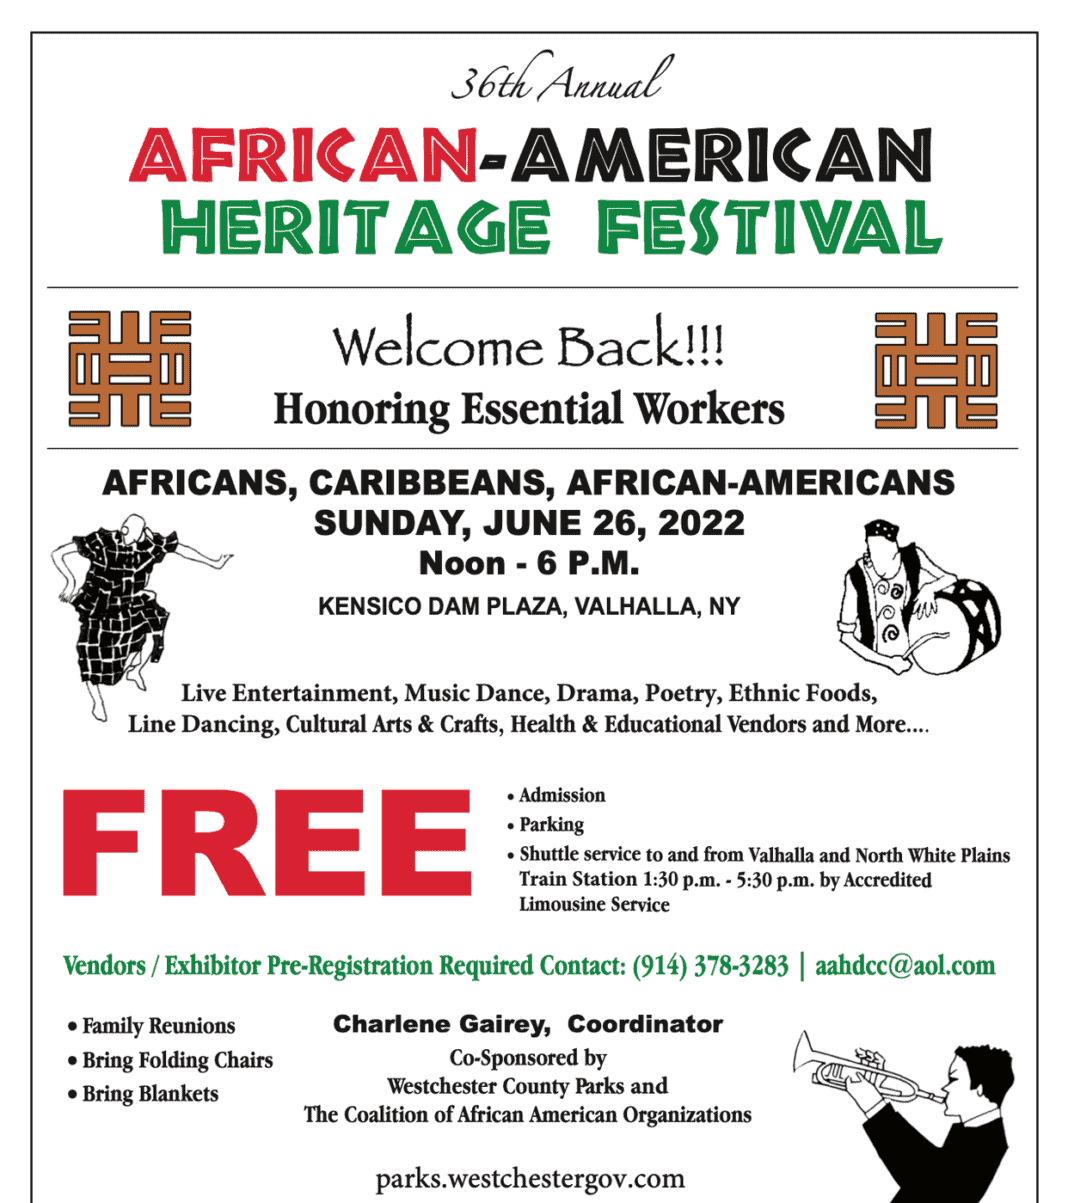 36th Annual AfricanAmerican Heritage Festival Returns to Kensico Dam